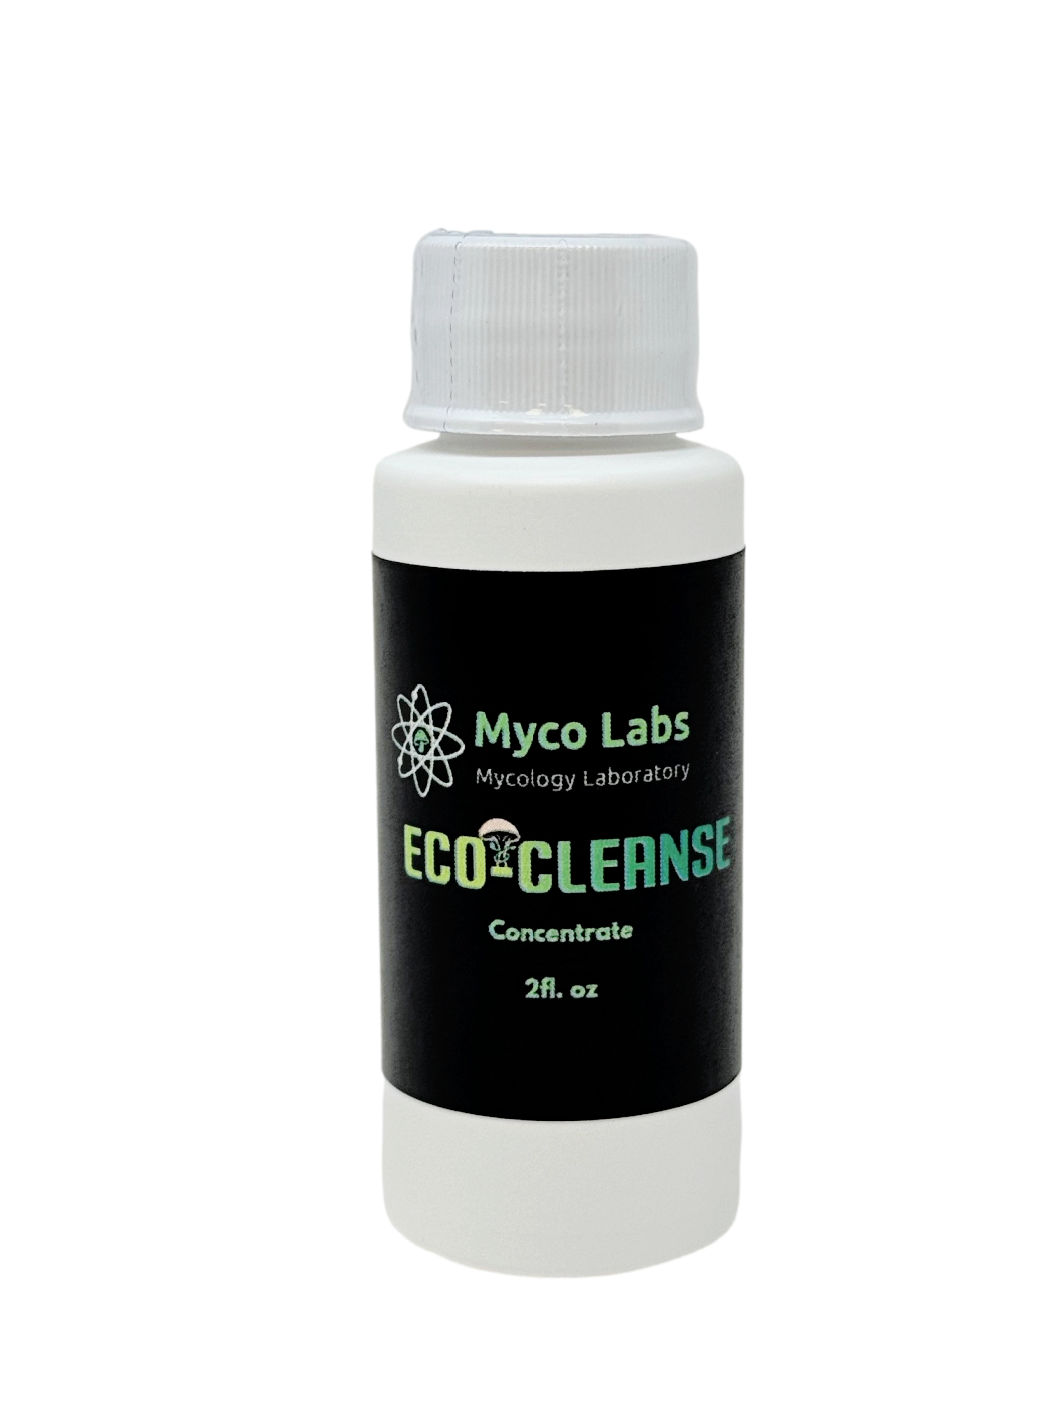 Myco Labs ECO-CLEANSE Anti-Bacteria & Mold Inhibitor Spray Concentrate (2oz)